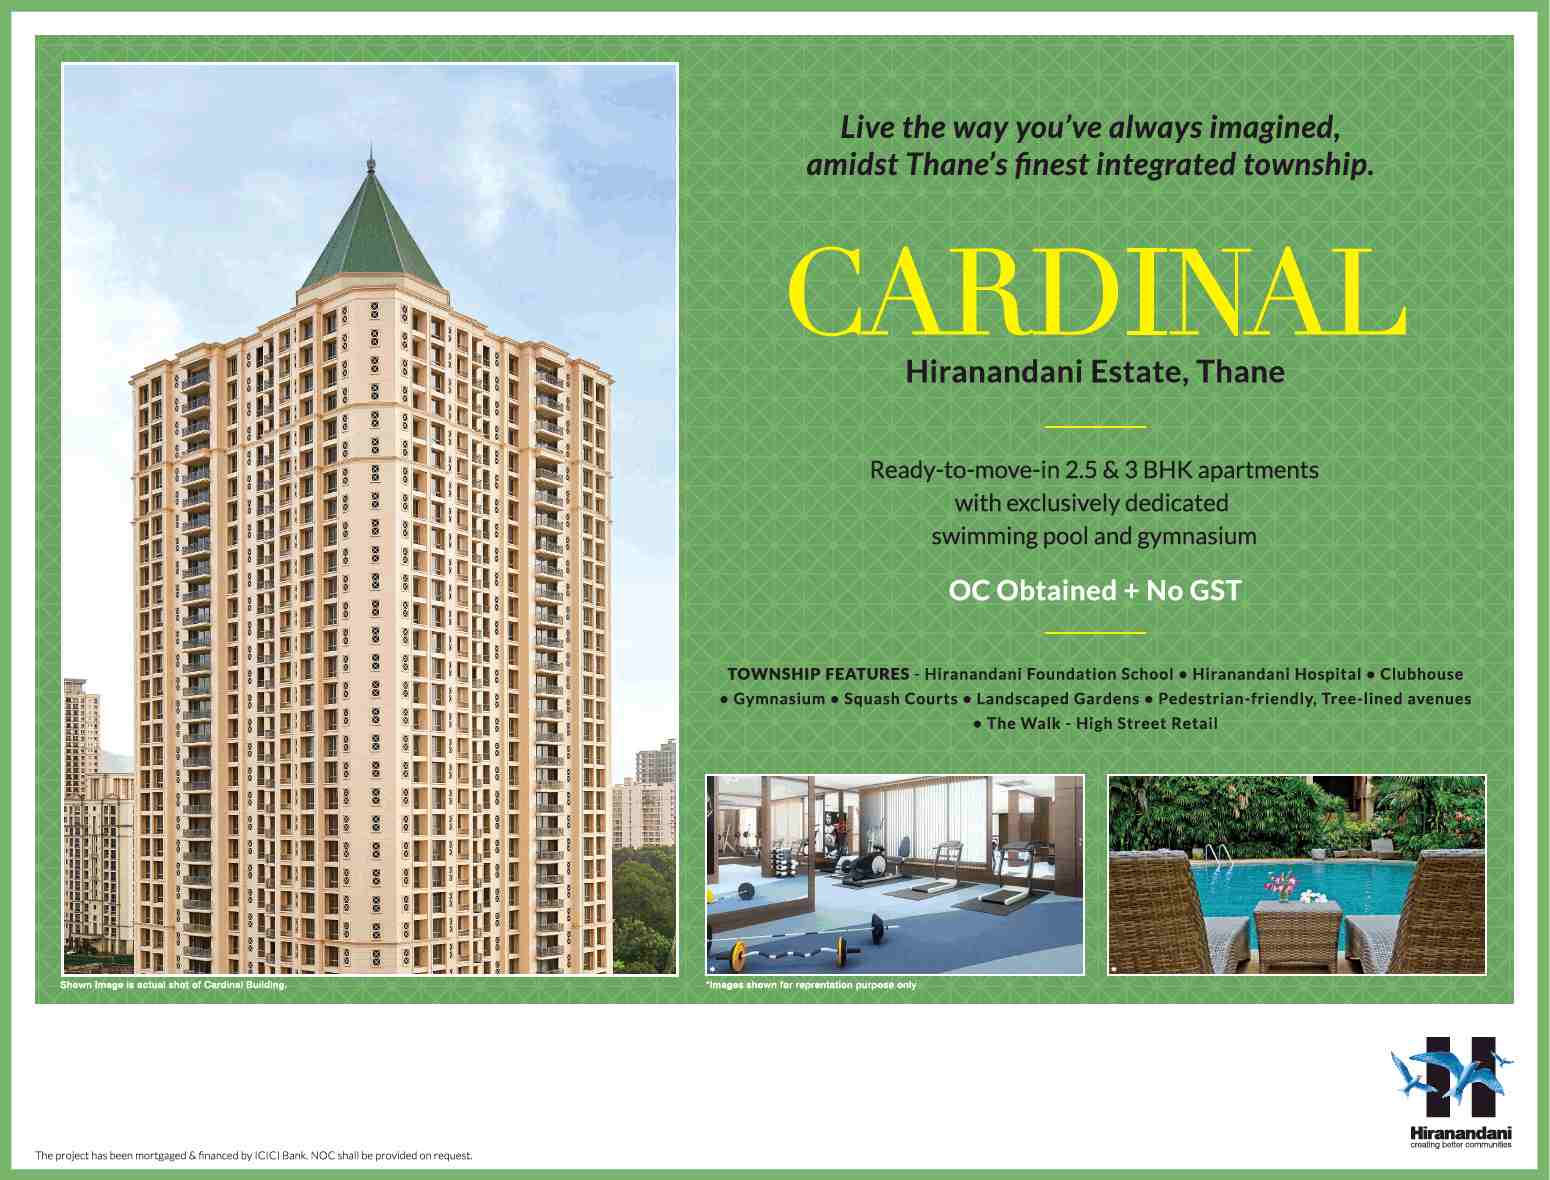 Live amidst Thane's finest integrated township at Hiranandani Estate Cardinal in Mumbai Update